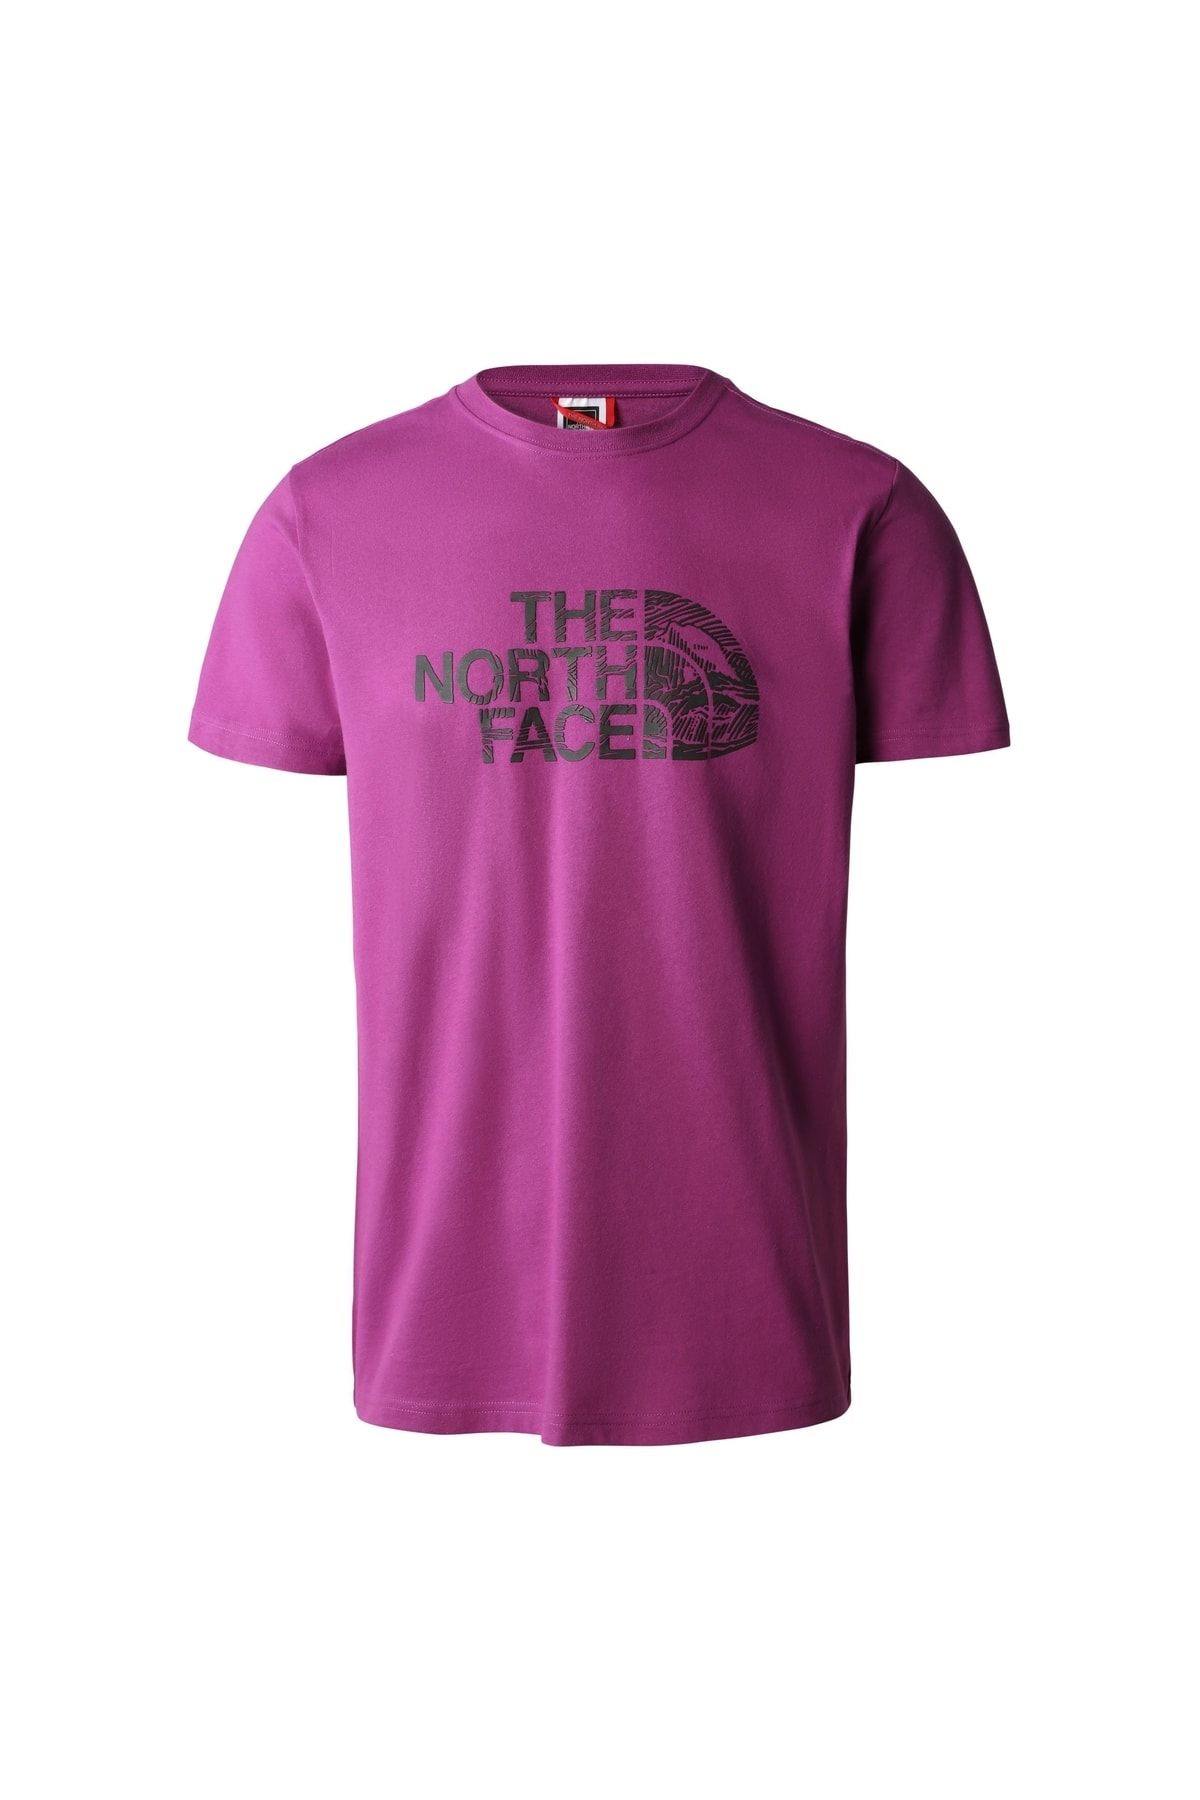 The North Face M S/s Woodcut Dome Tee-eu Erkek Tshirt - Bisiklet